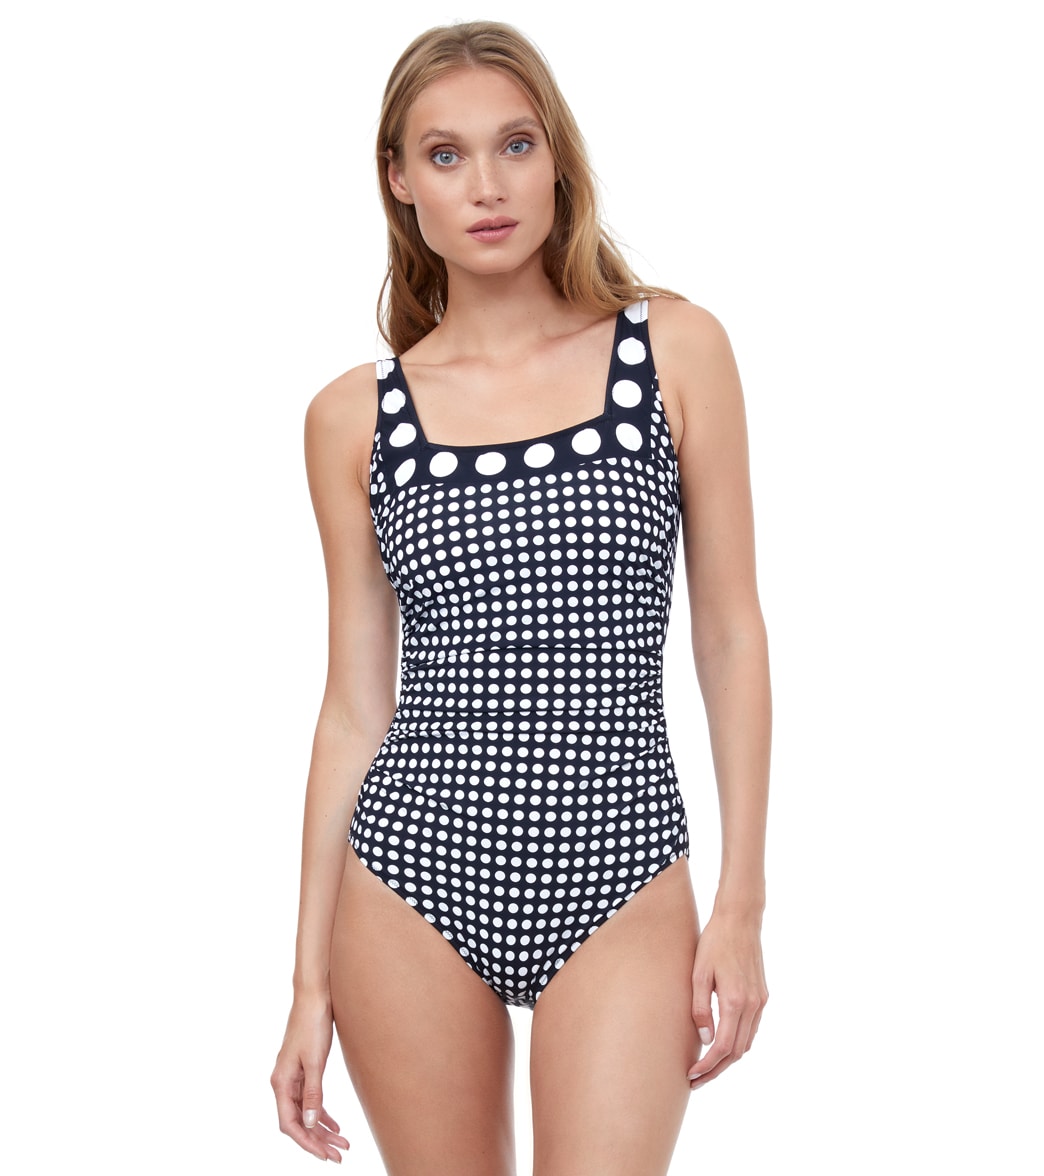 Gottex Women's Marilyn Square Neck One Piece Swimsuit